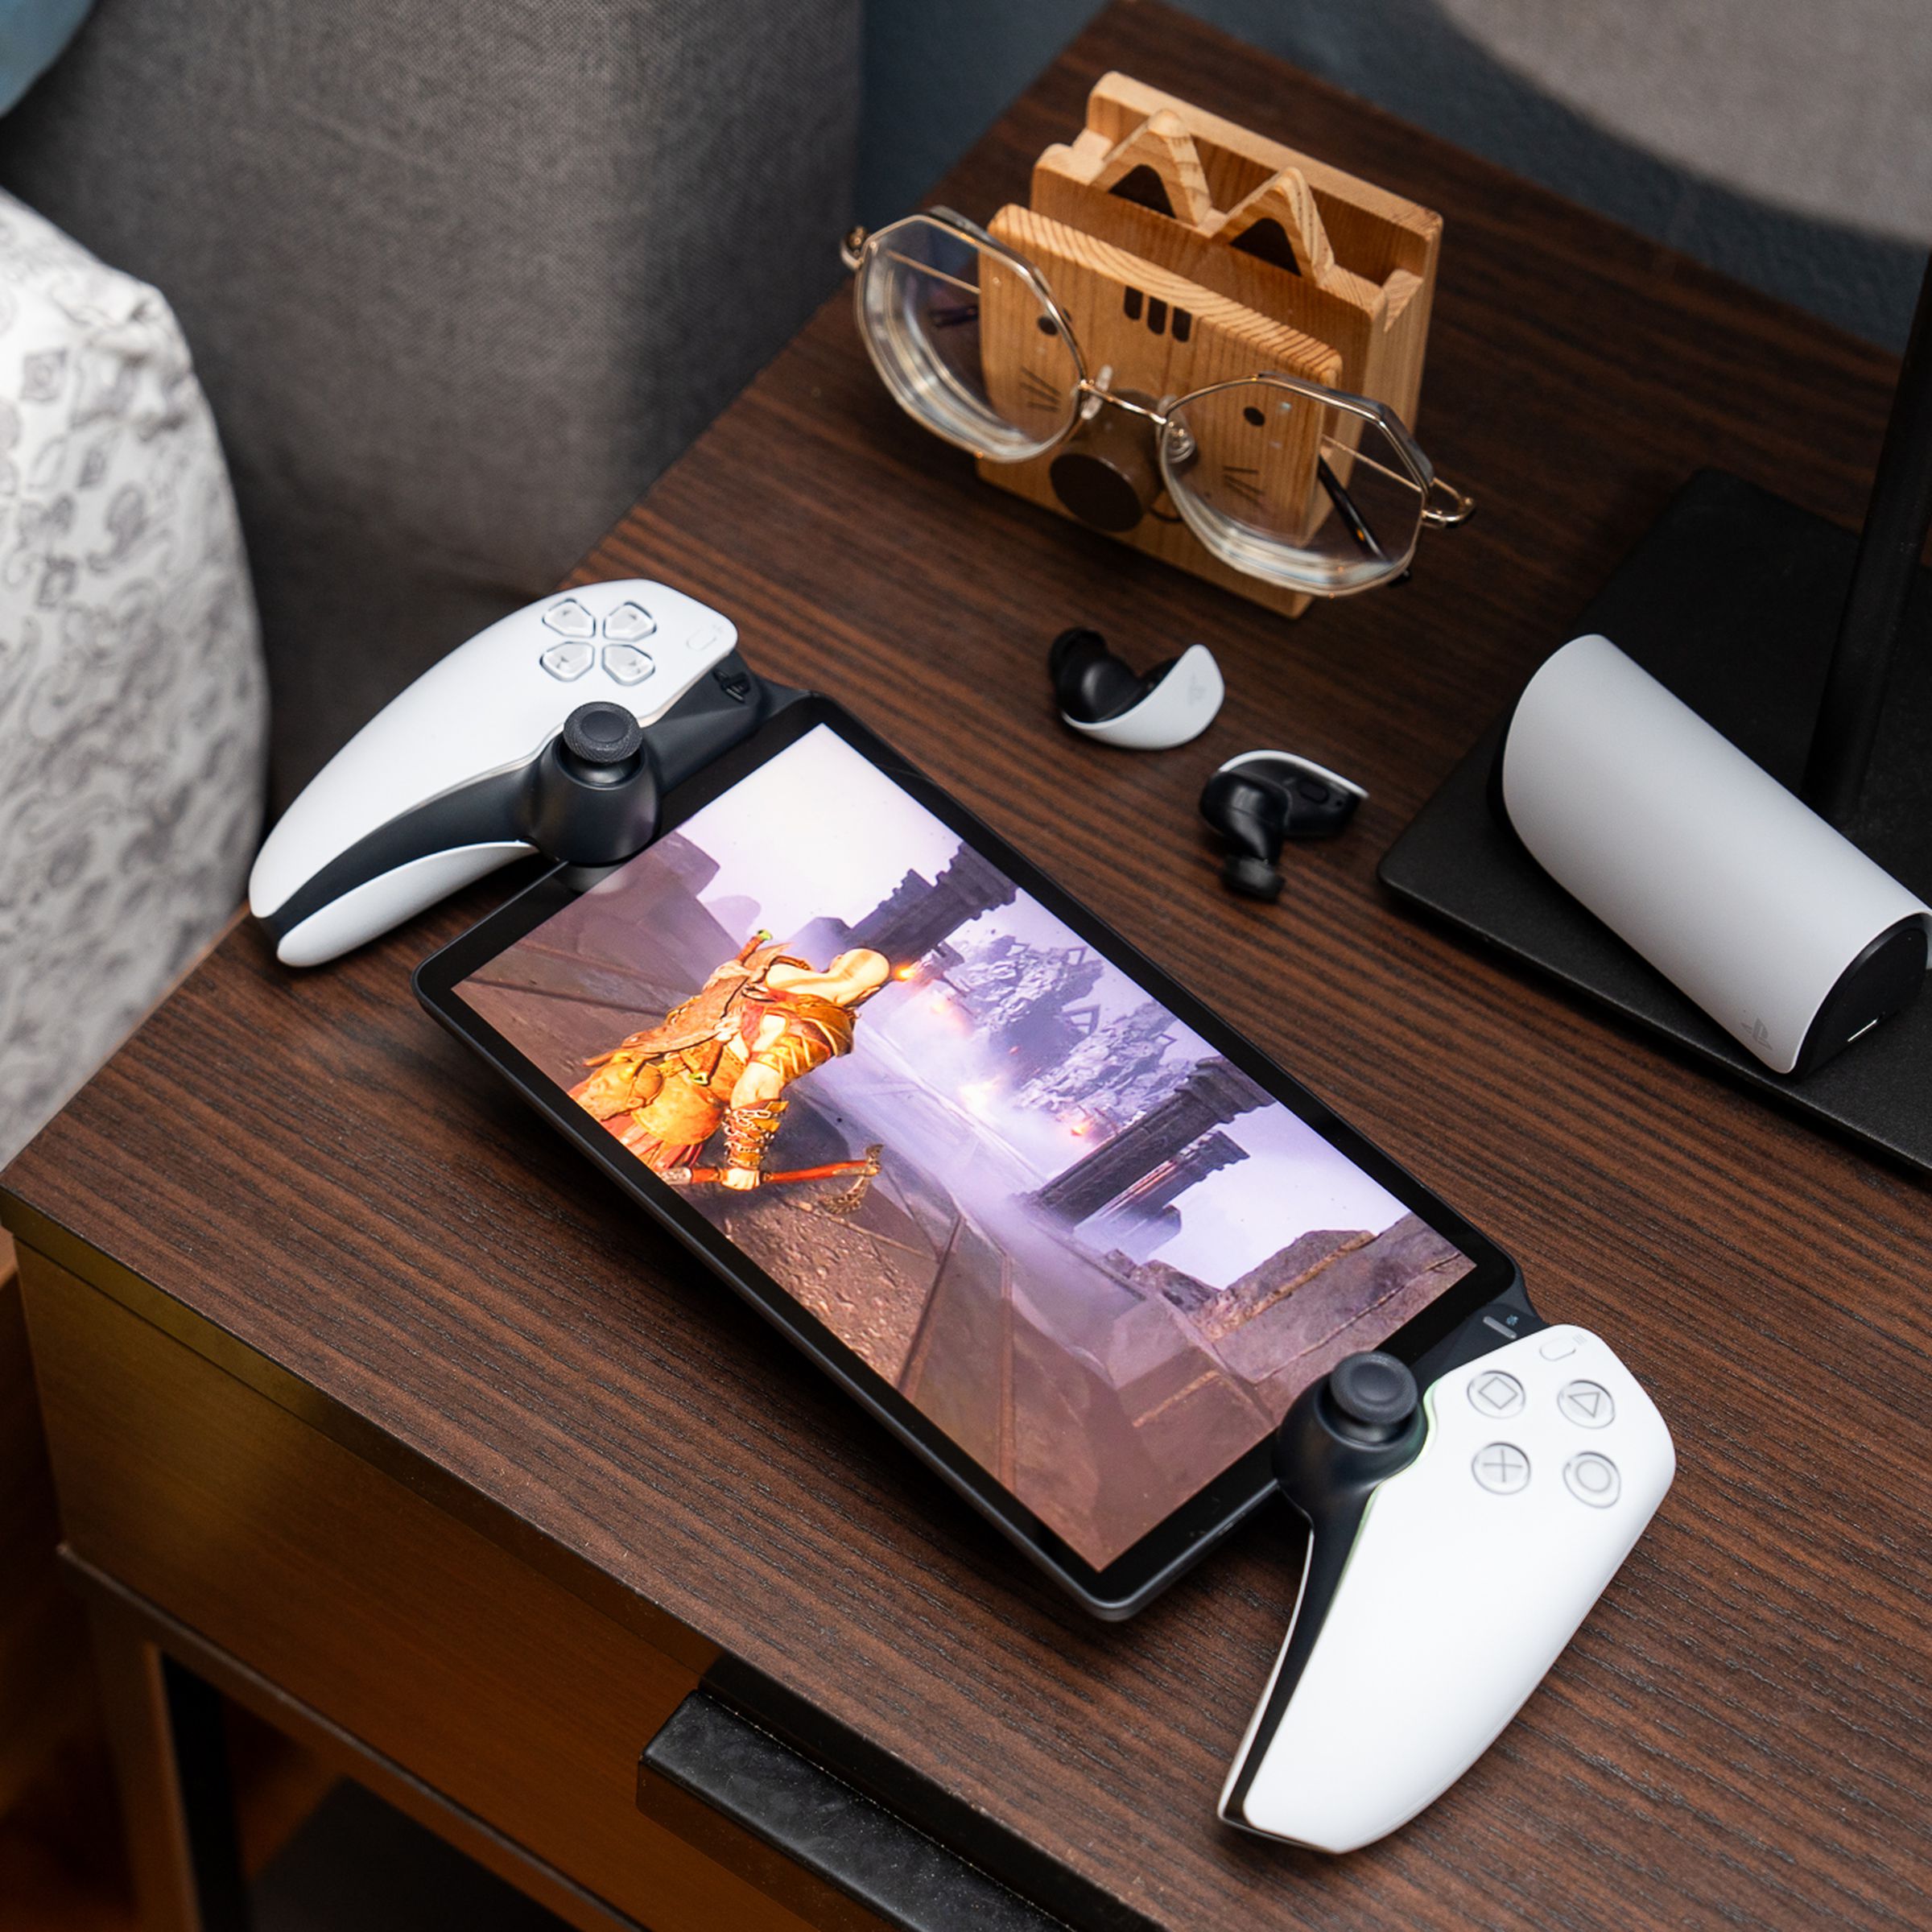 The PlayStation Portal sitting on a bedside table with a pair of earbuds. The handheld gaming device is streaming God of War: Ragnarök off a PlayStation 5.